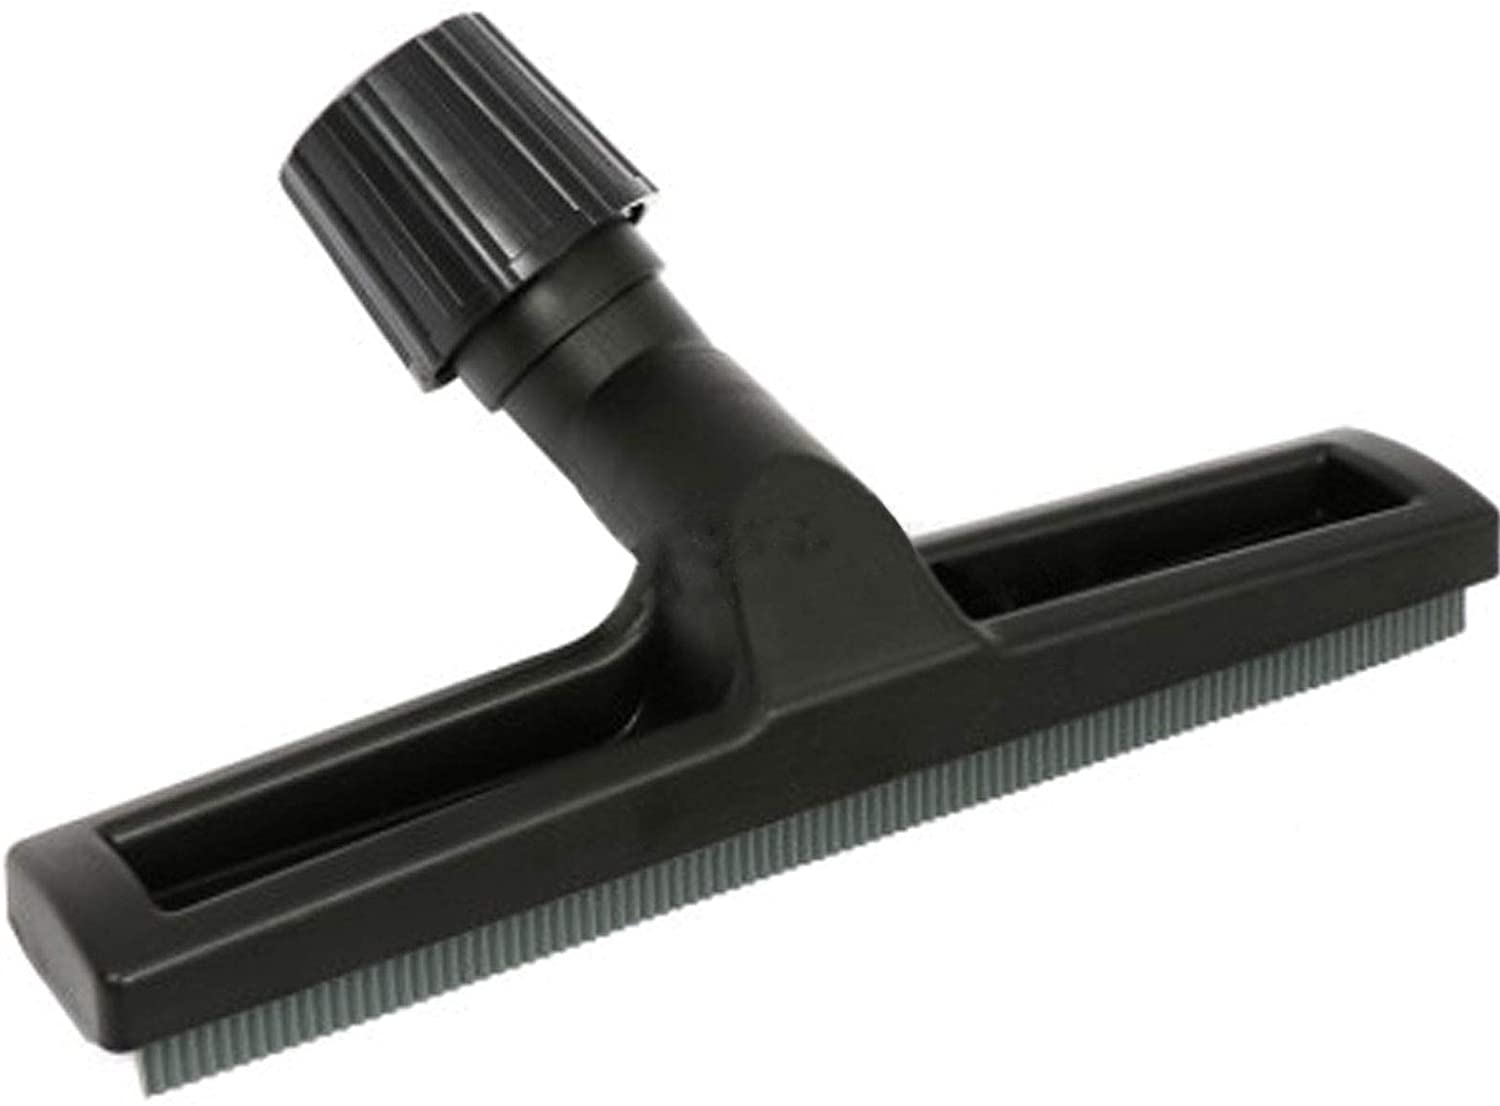 Squeegee Floor Nozzle Wet Pick Up Tool for NUMATIC HENRY CHARLES GEORGE Vacuum